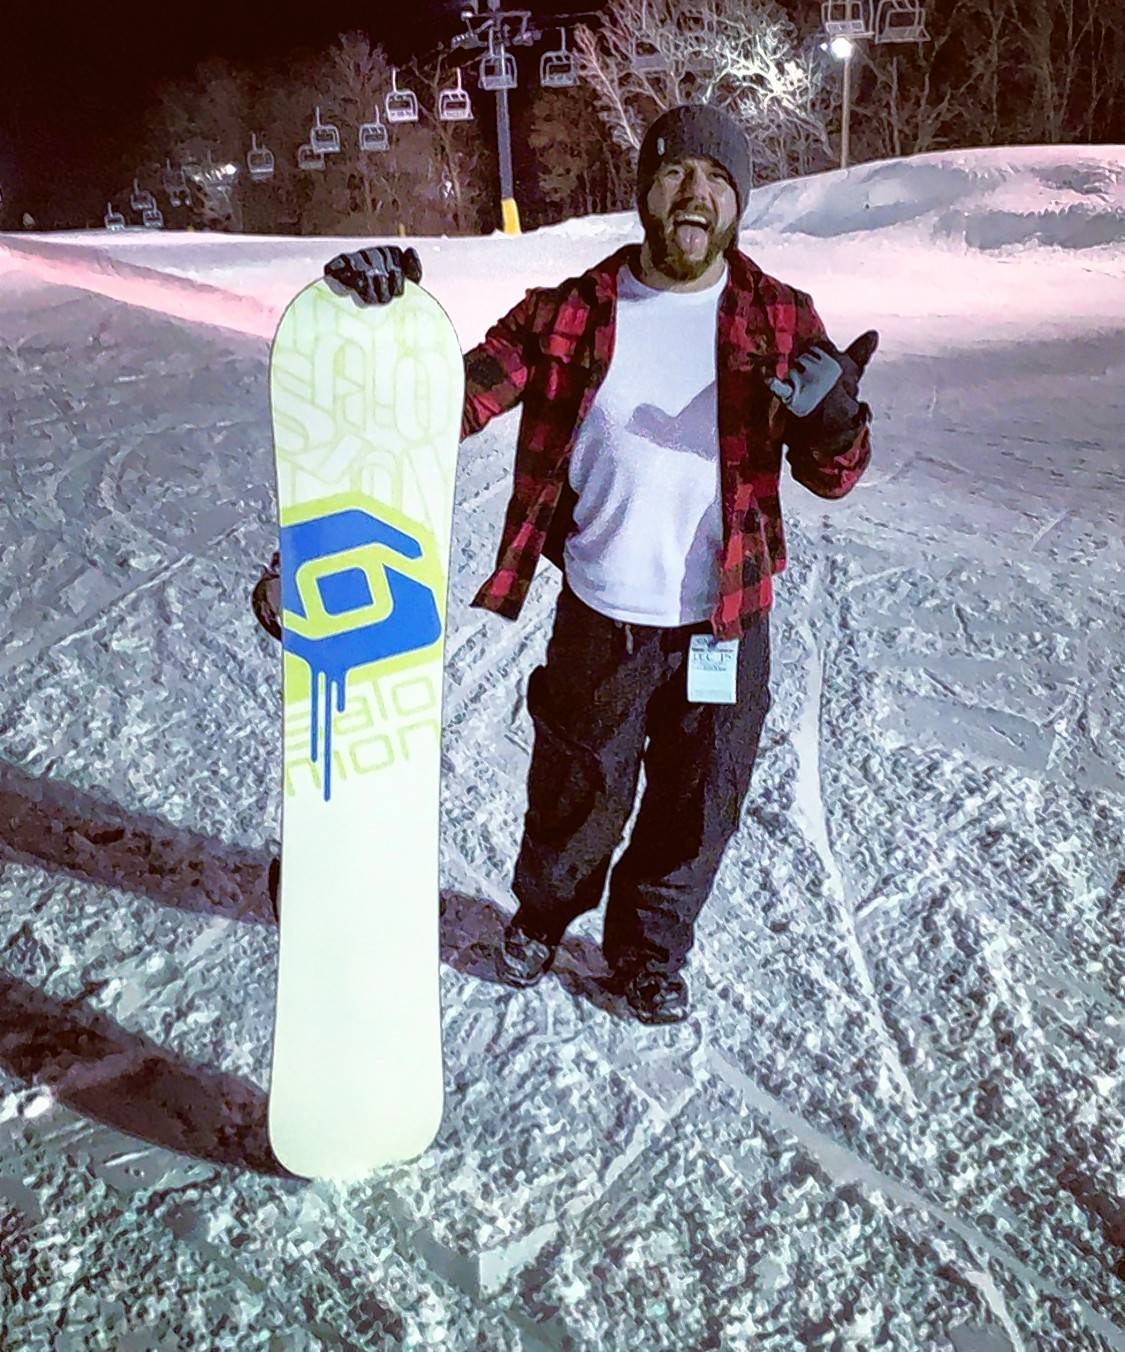 Personal trainer Patrick Stille is an avid outdoorsman, which helps him stay in shape. One of his favorite activities is snowboarding.